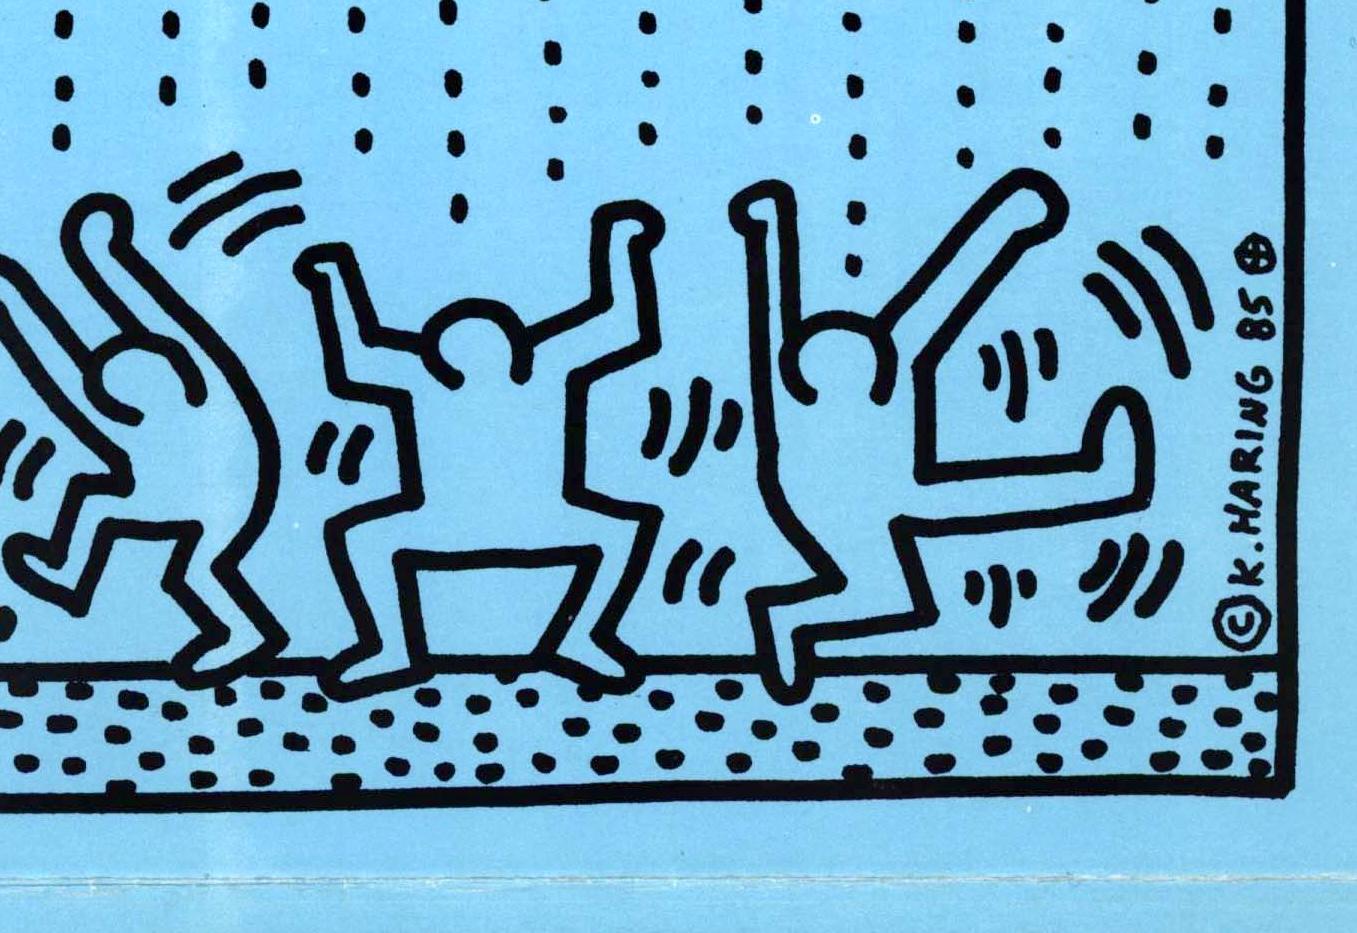 Keith Haring Rain Dance 1985 (Keith Haring posters) For Sale 5